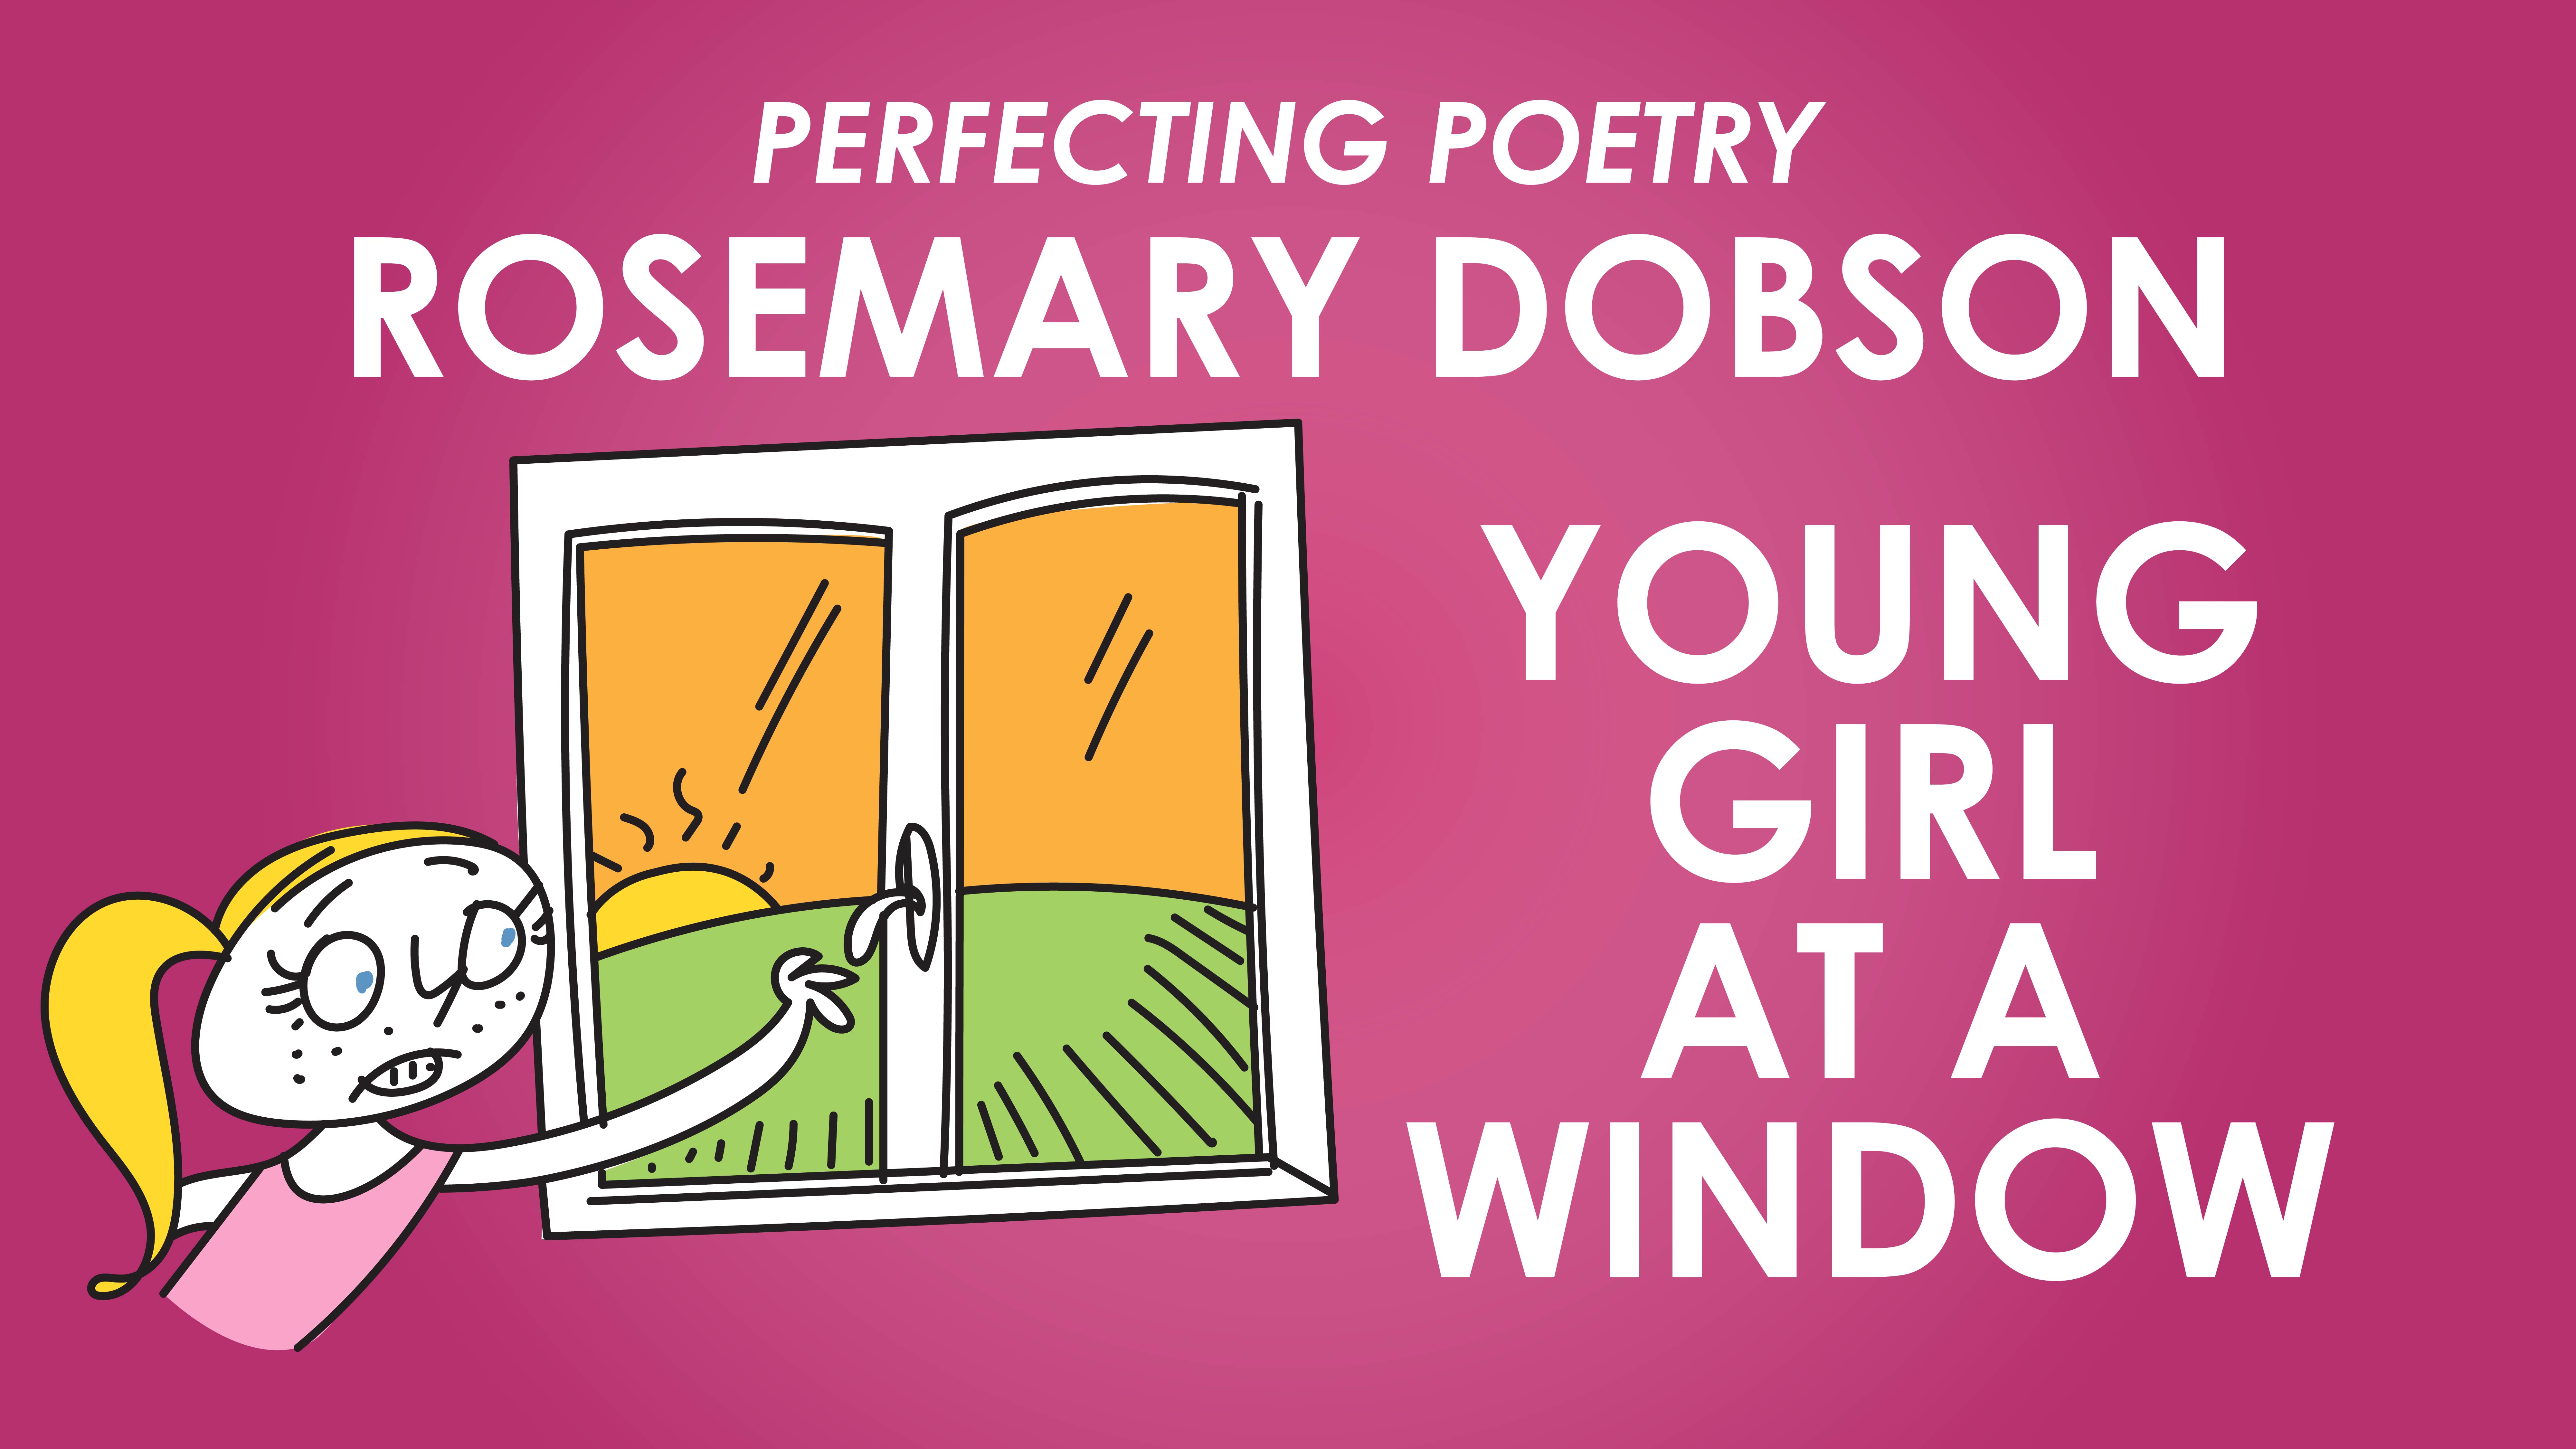 Young Girl at a Window - Rosemary Dobson - Perfecting Poetry